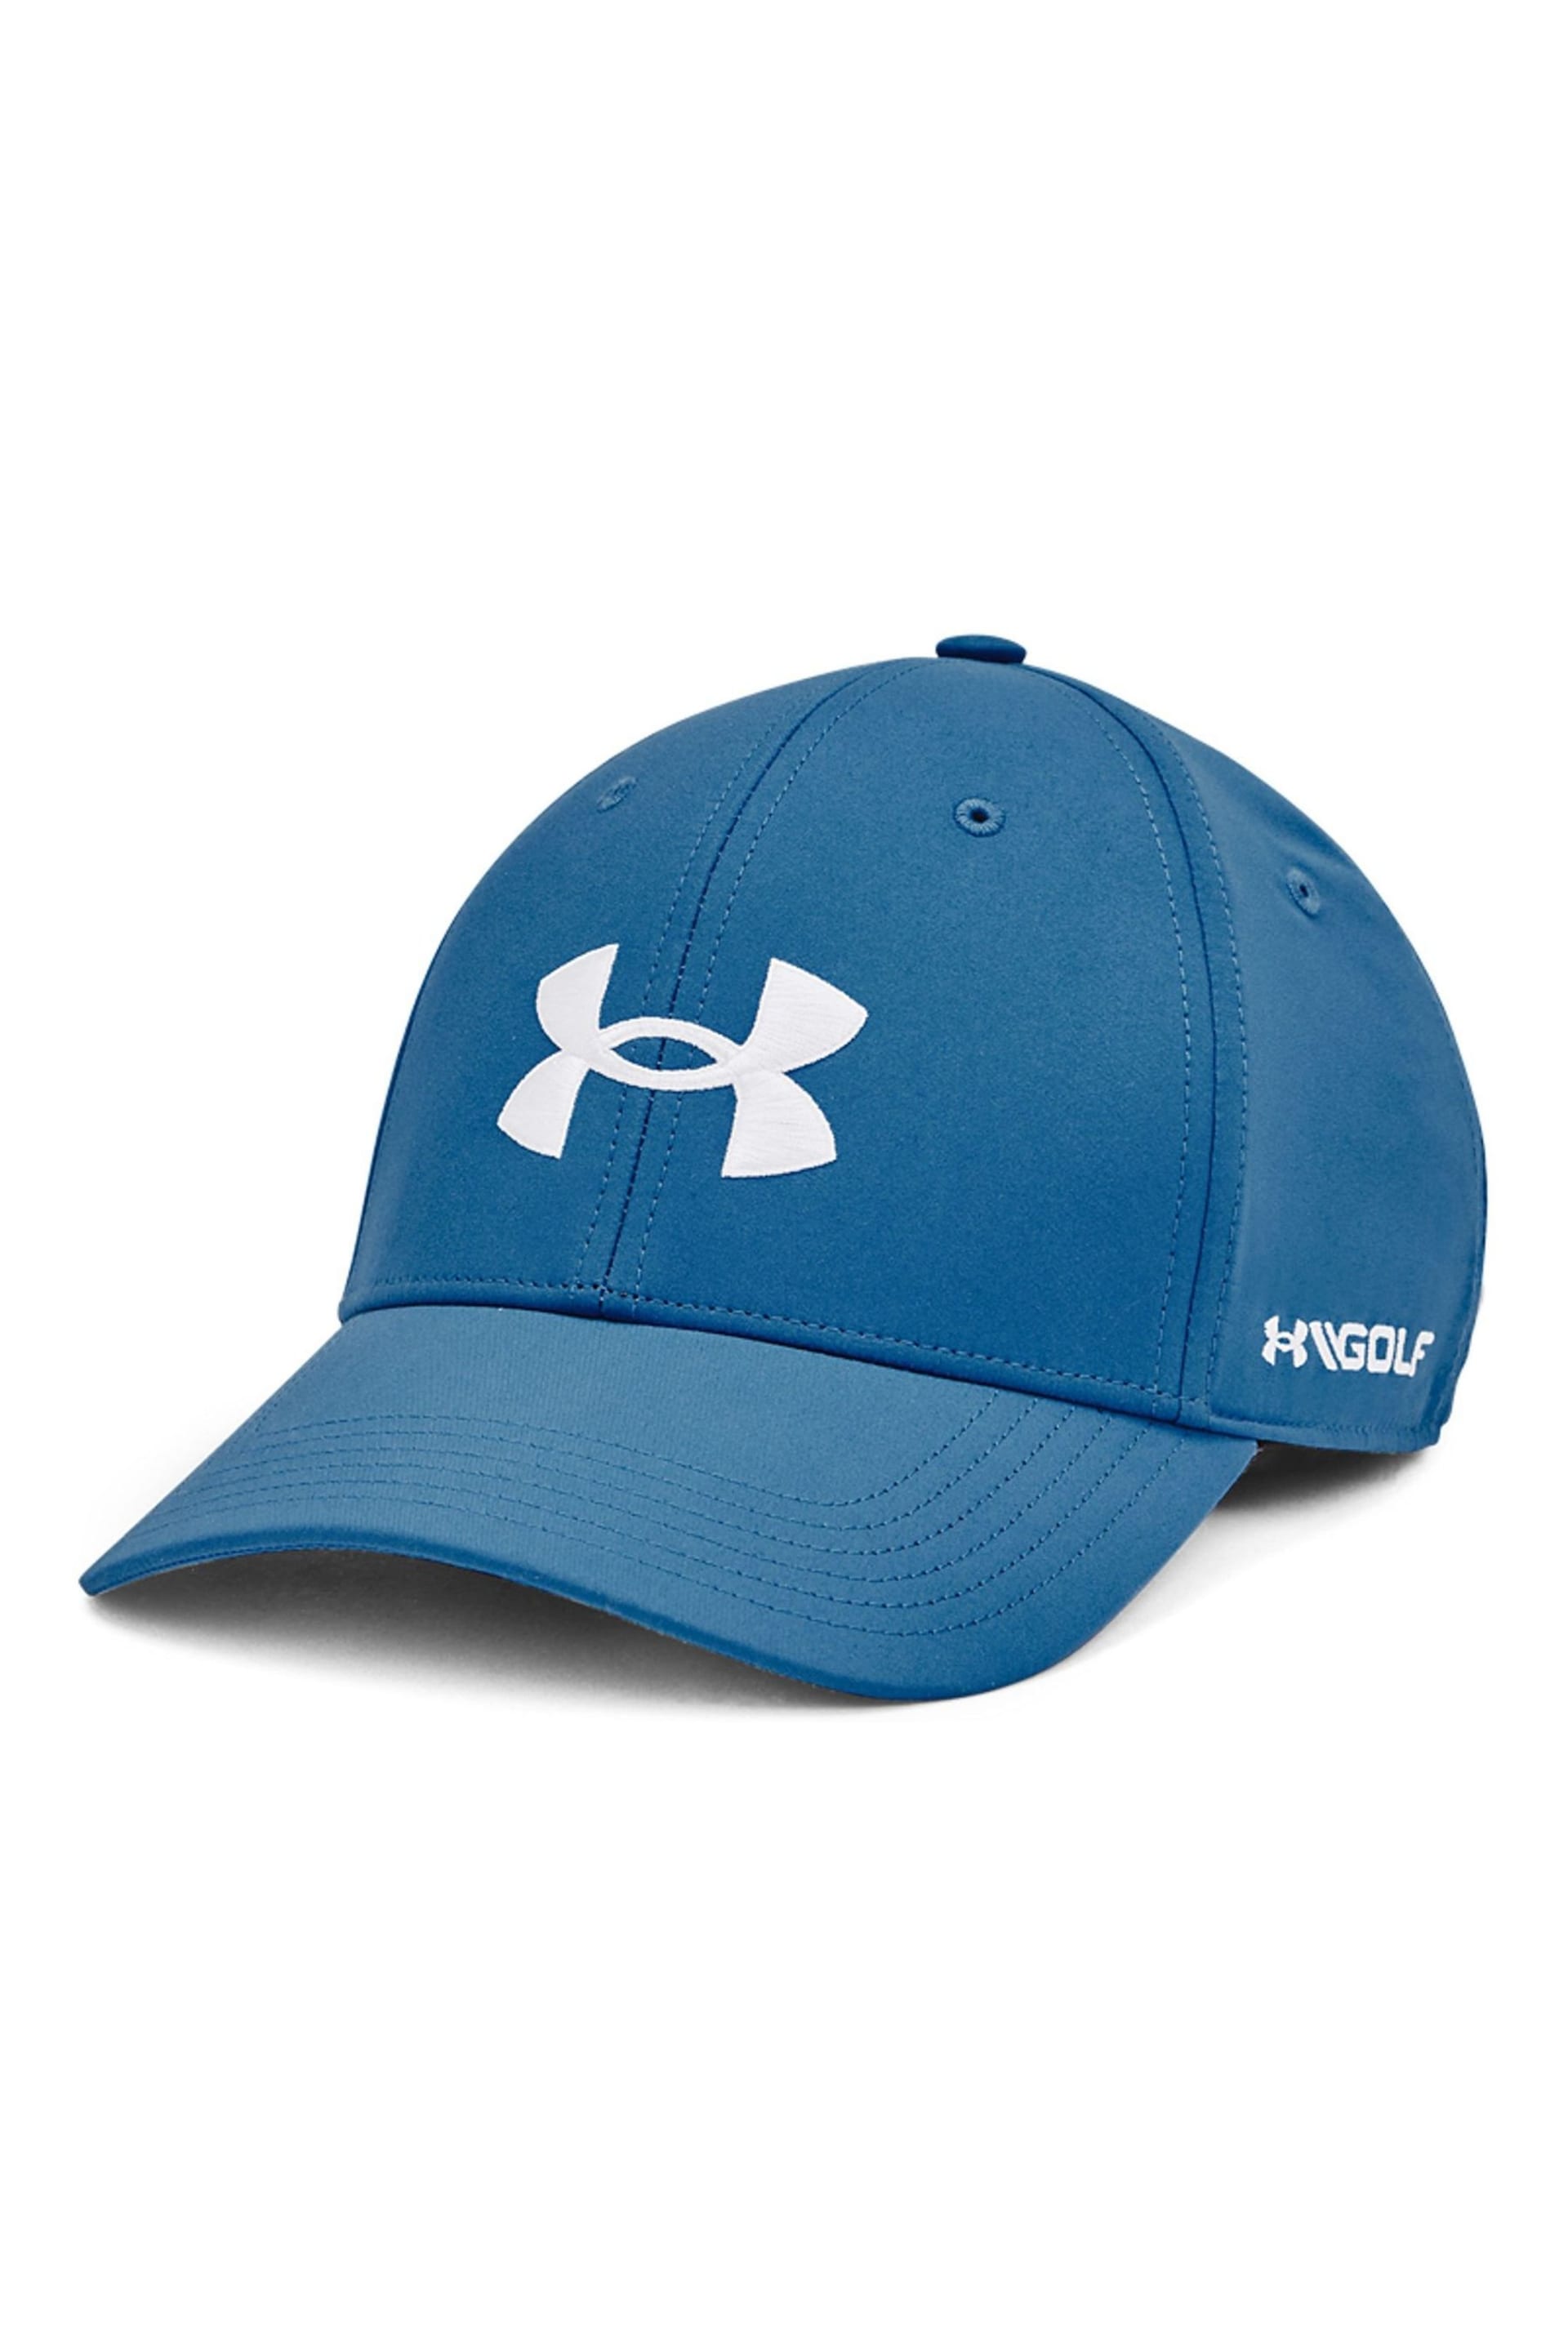 Under Armour Blue/White/Grey Golf 96 Cap - Image 2 of 3